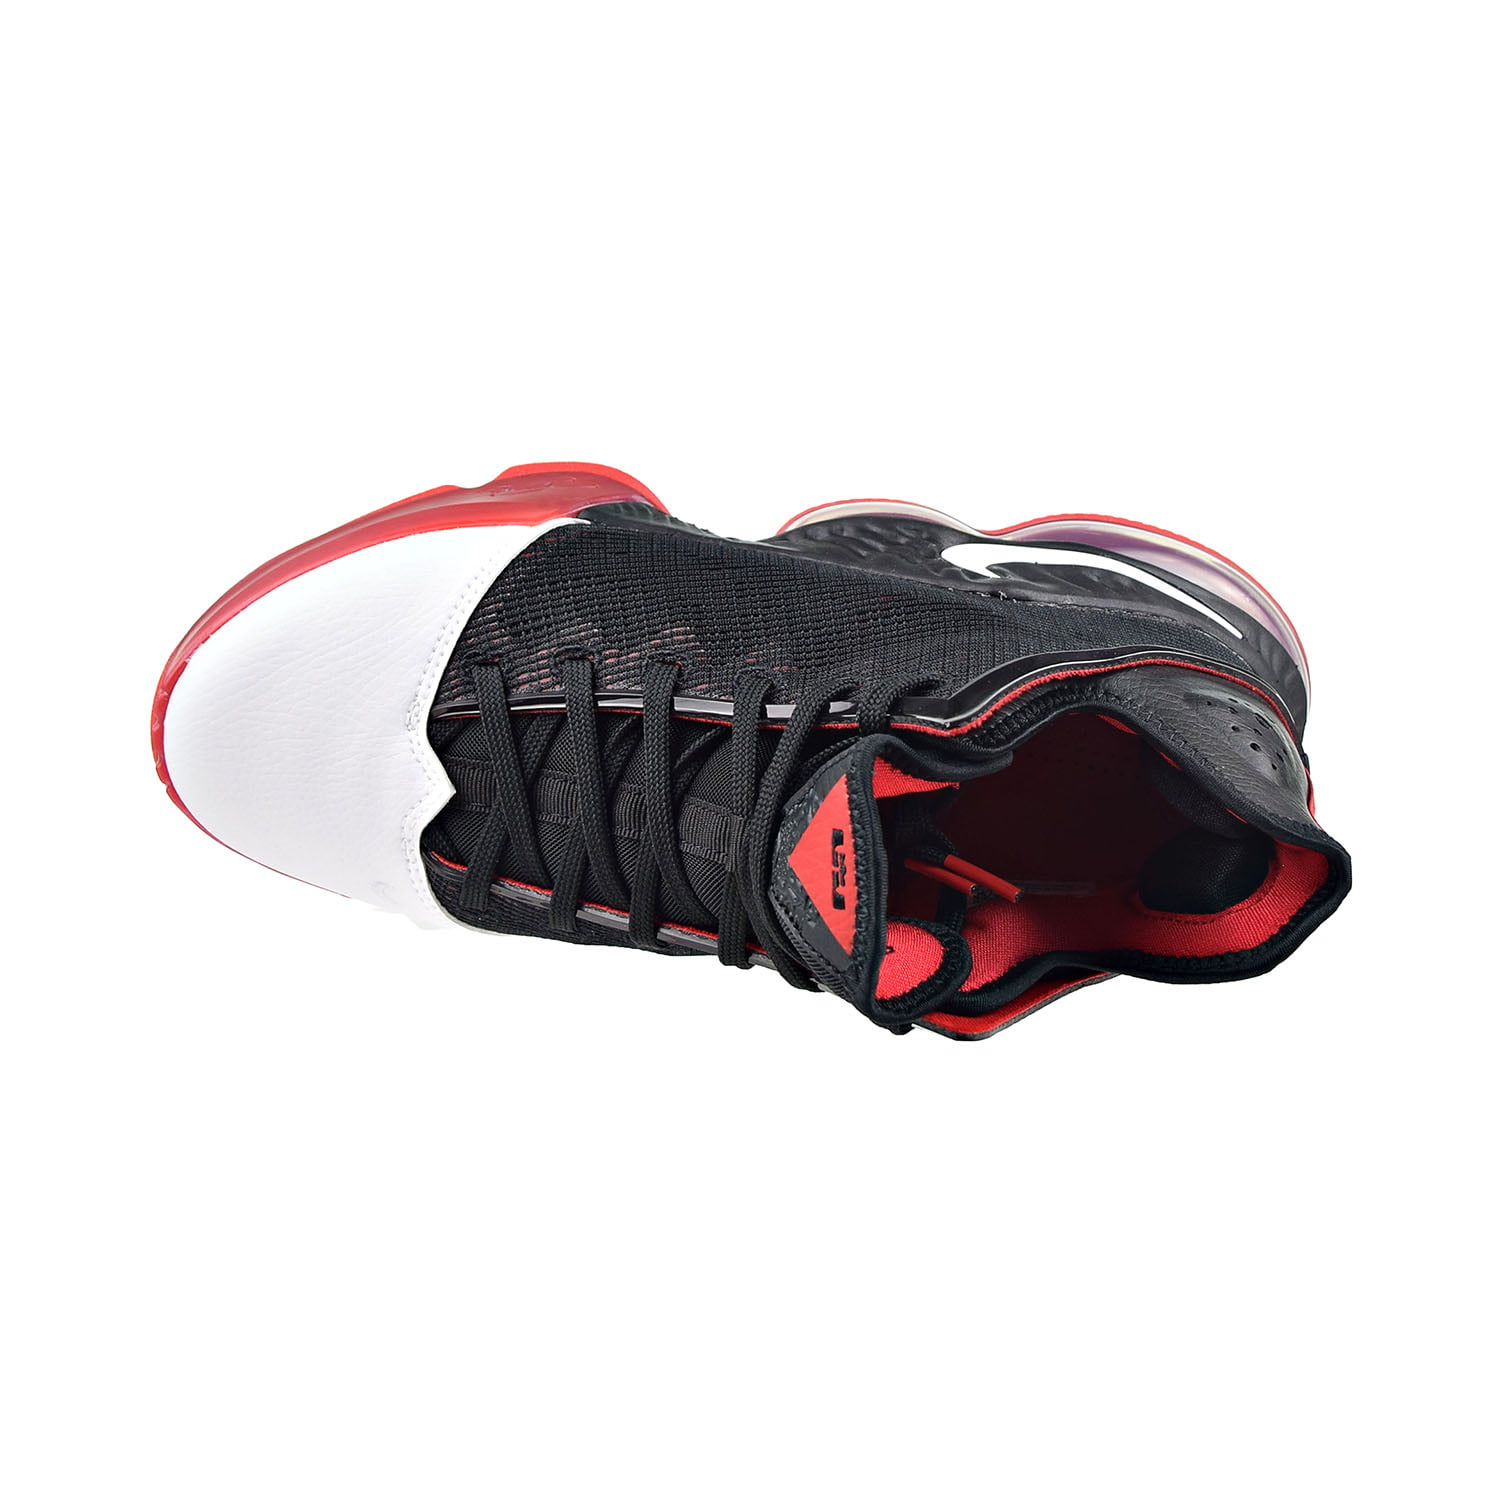 Nike LeBron 19 Low Bred DH1270-001